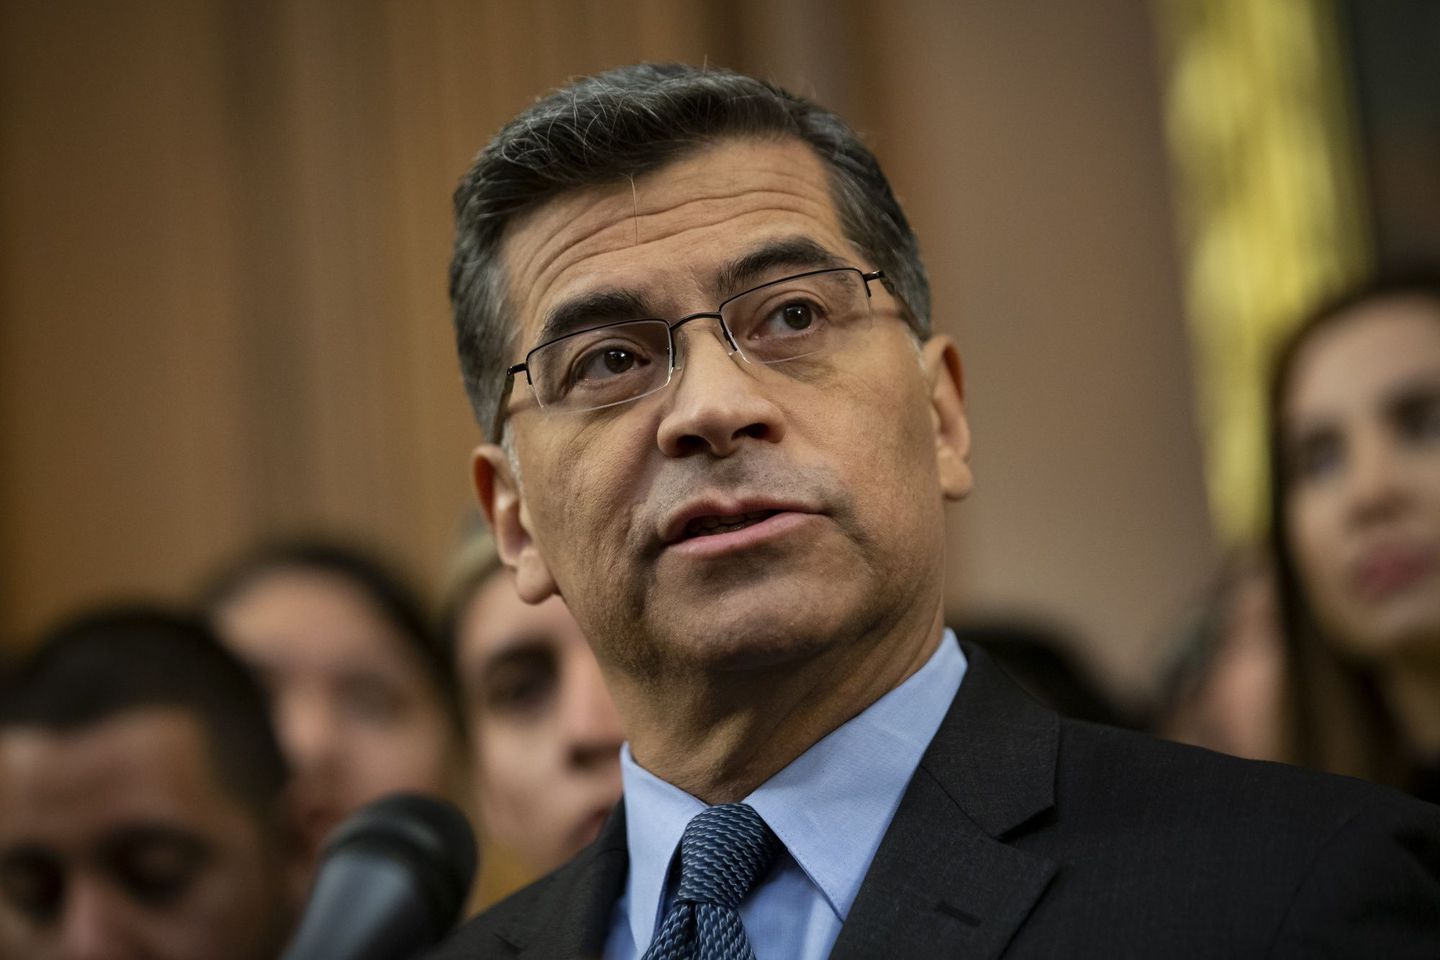 Xavier Becerra appointed as secretary of Health and Human Services in Biden Administration